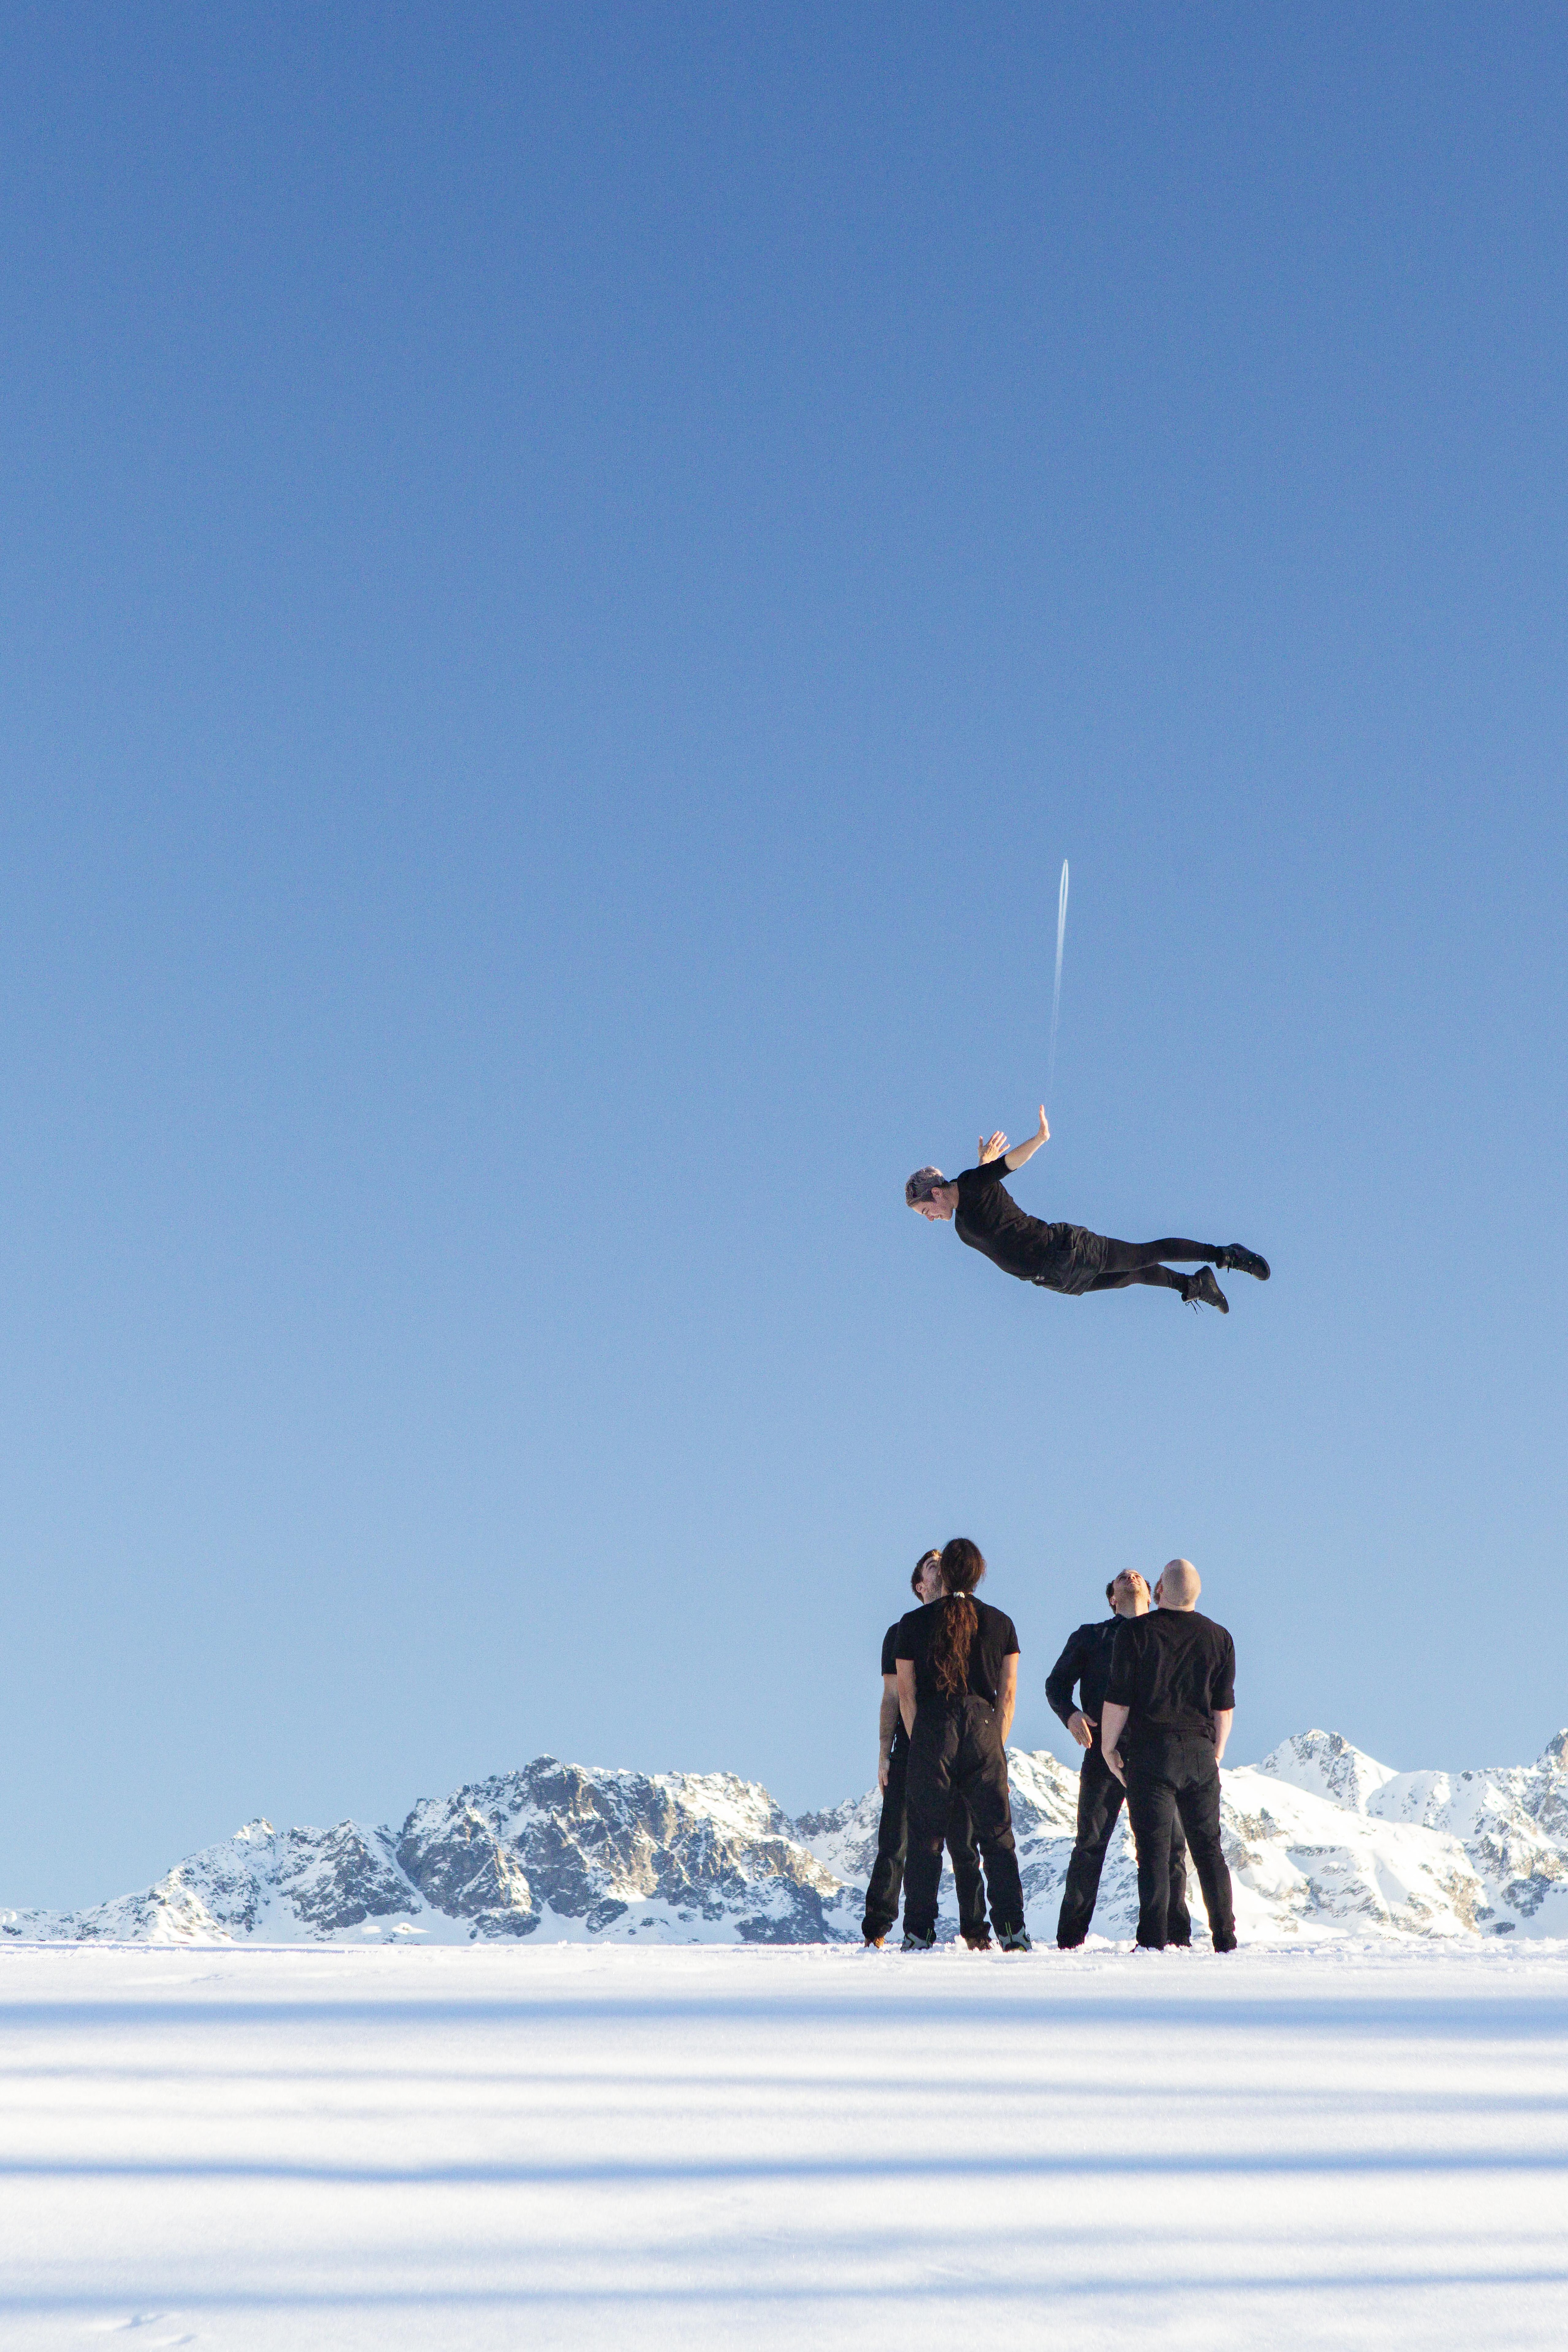 Four men in black catch a fifth man in mid-air in the snow.